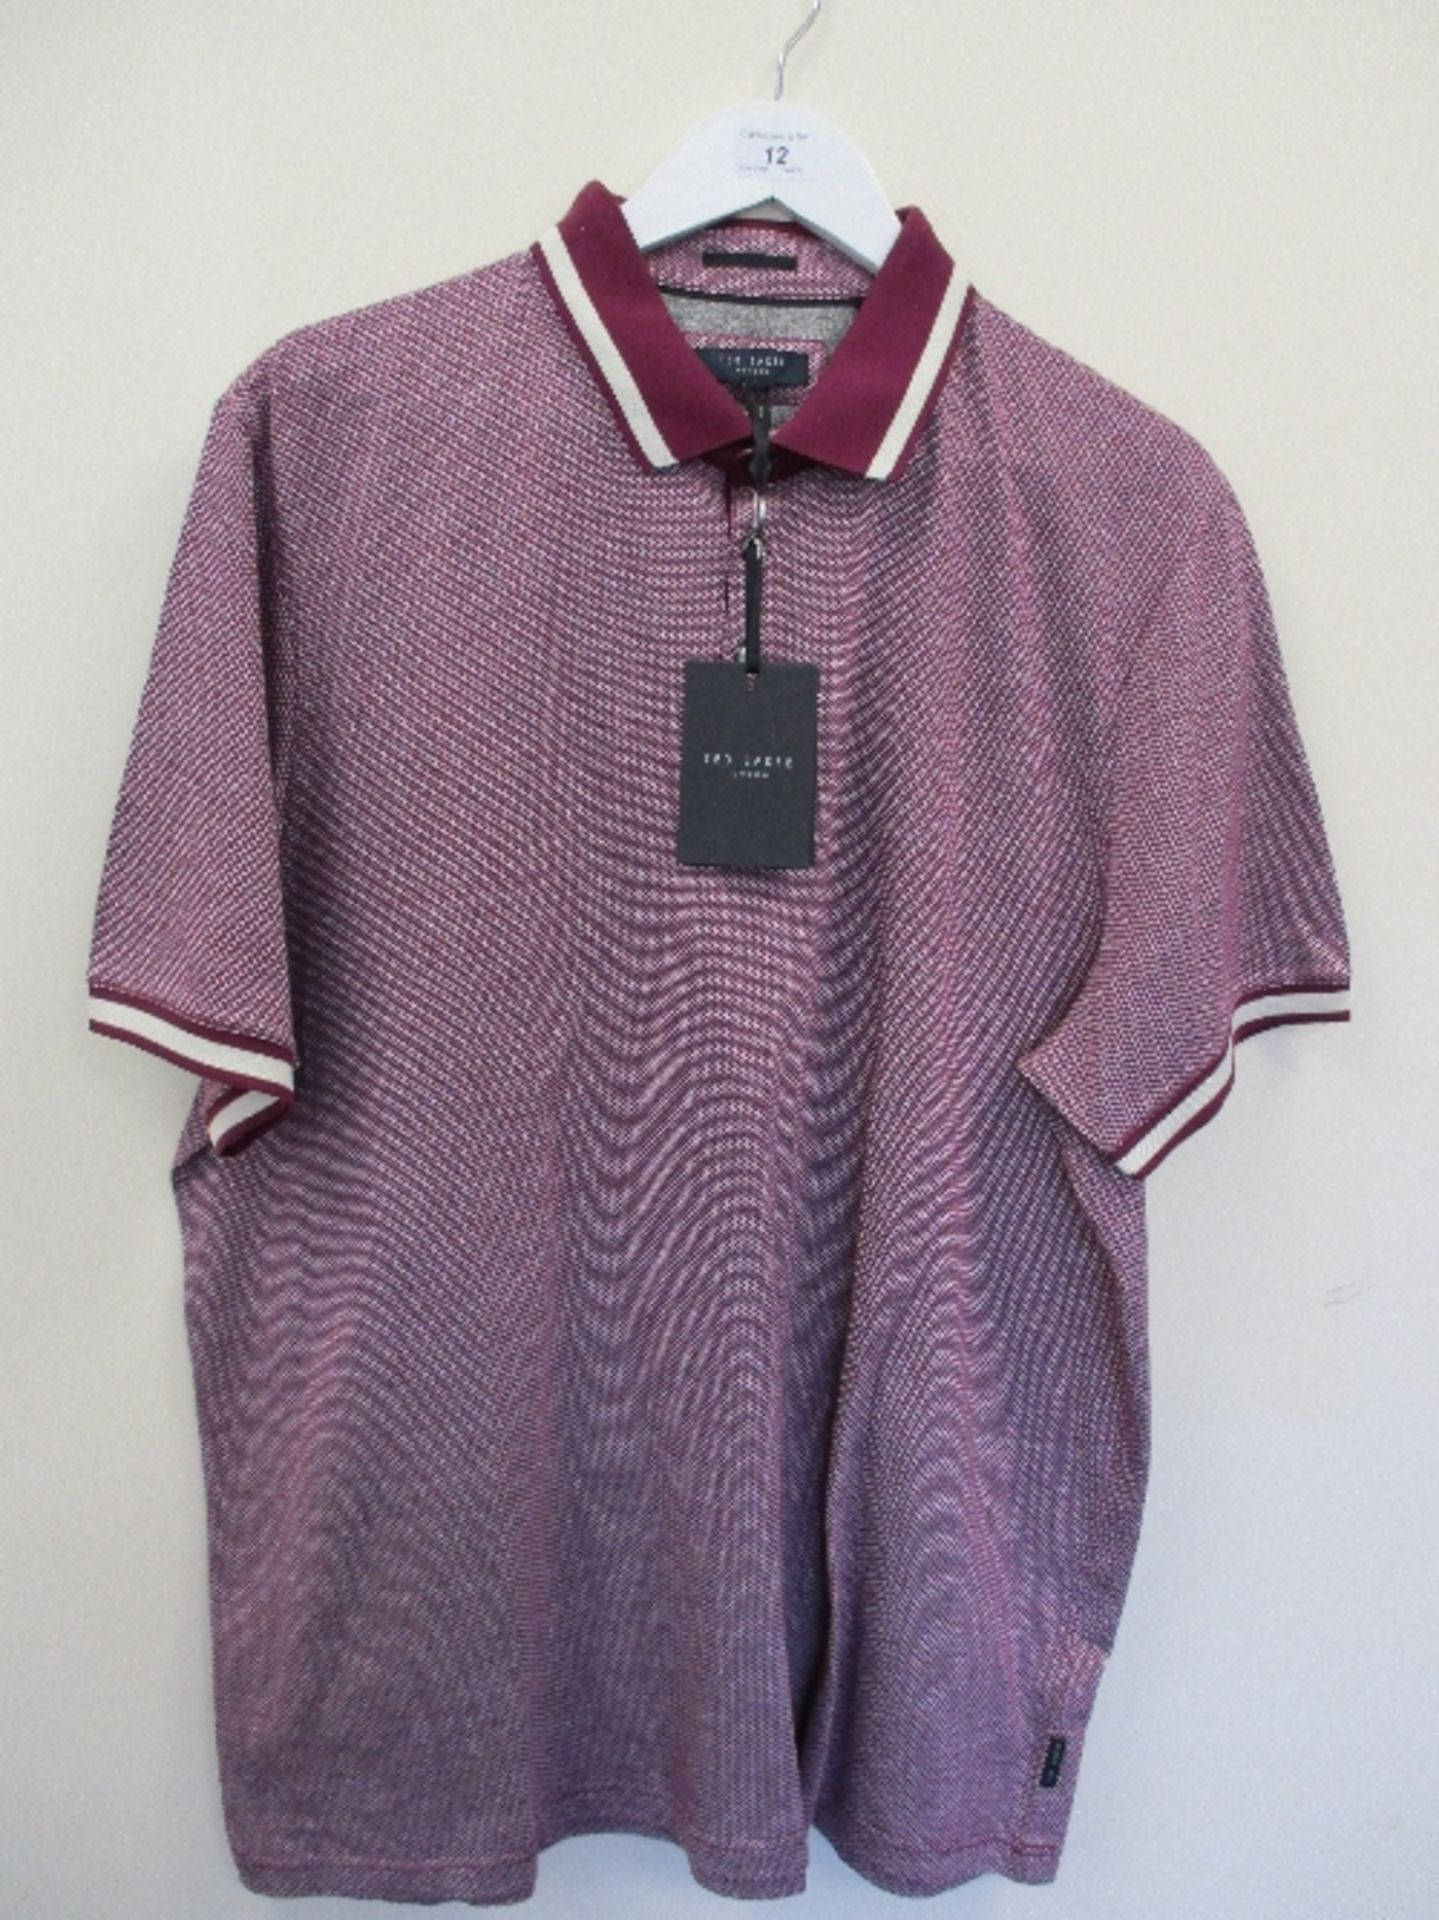 Ted Baker polo shirt - purple - small RRP £69